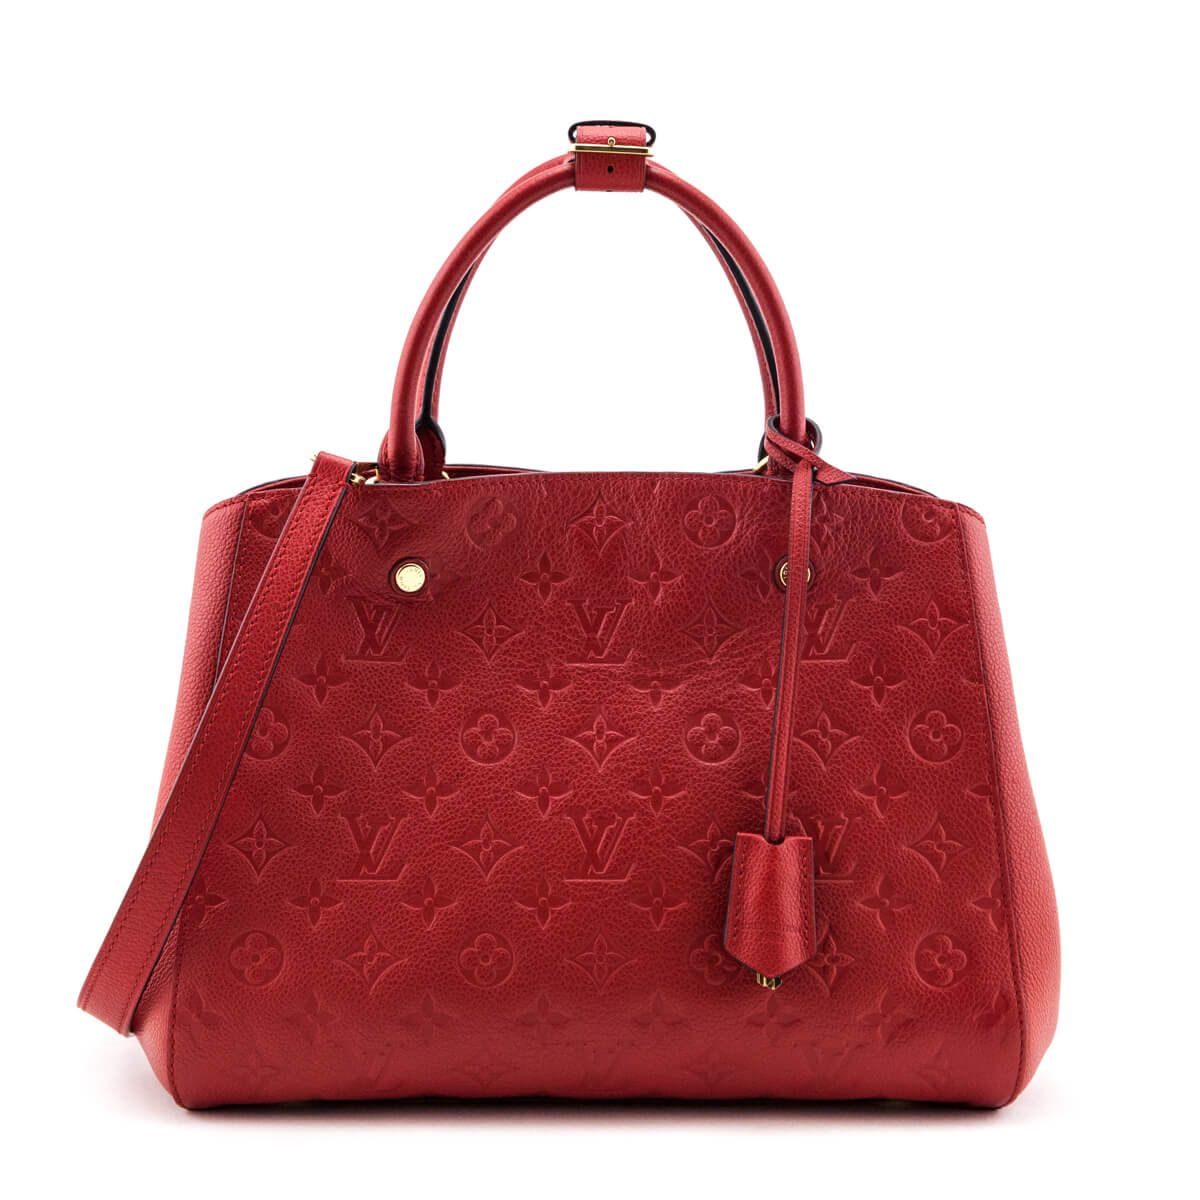 Louis Vuitton - Preowned Designer Clothing & Shoes - Love that Bag